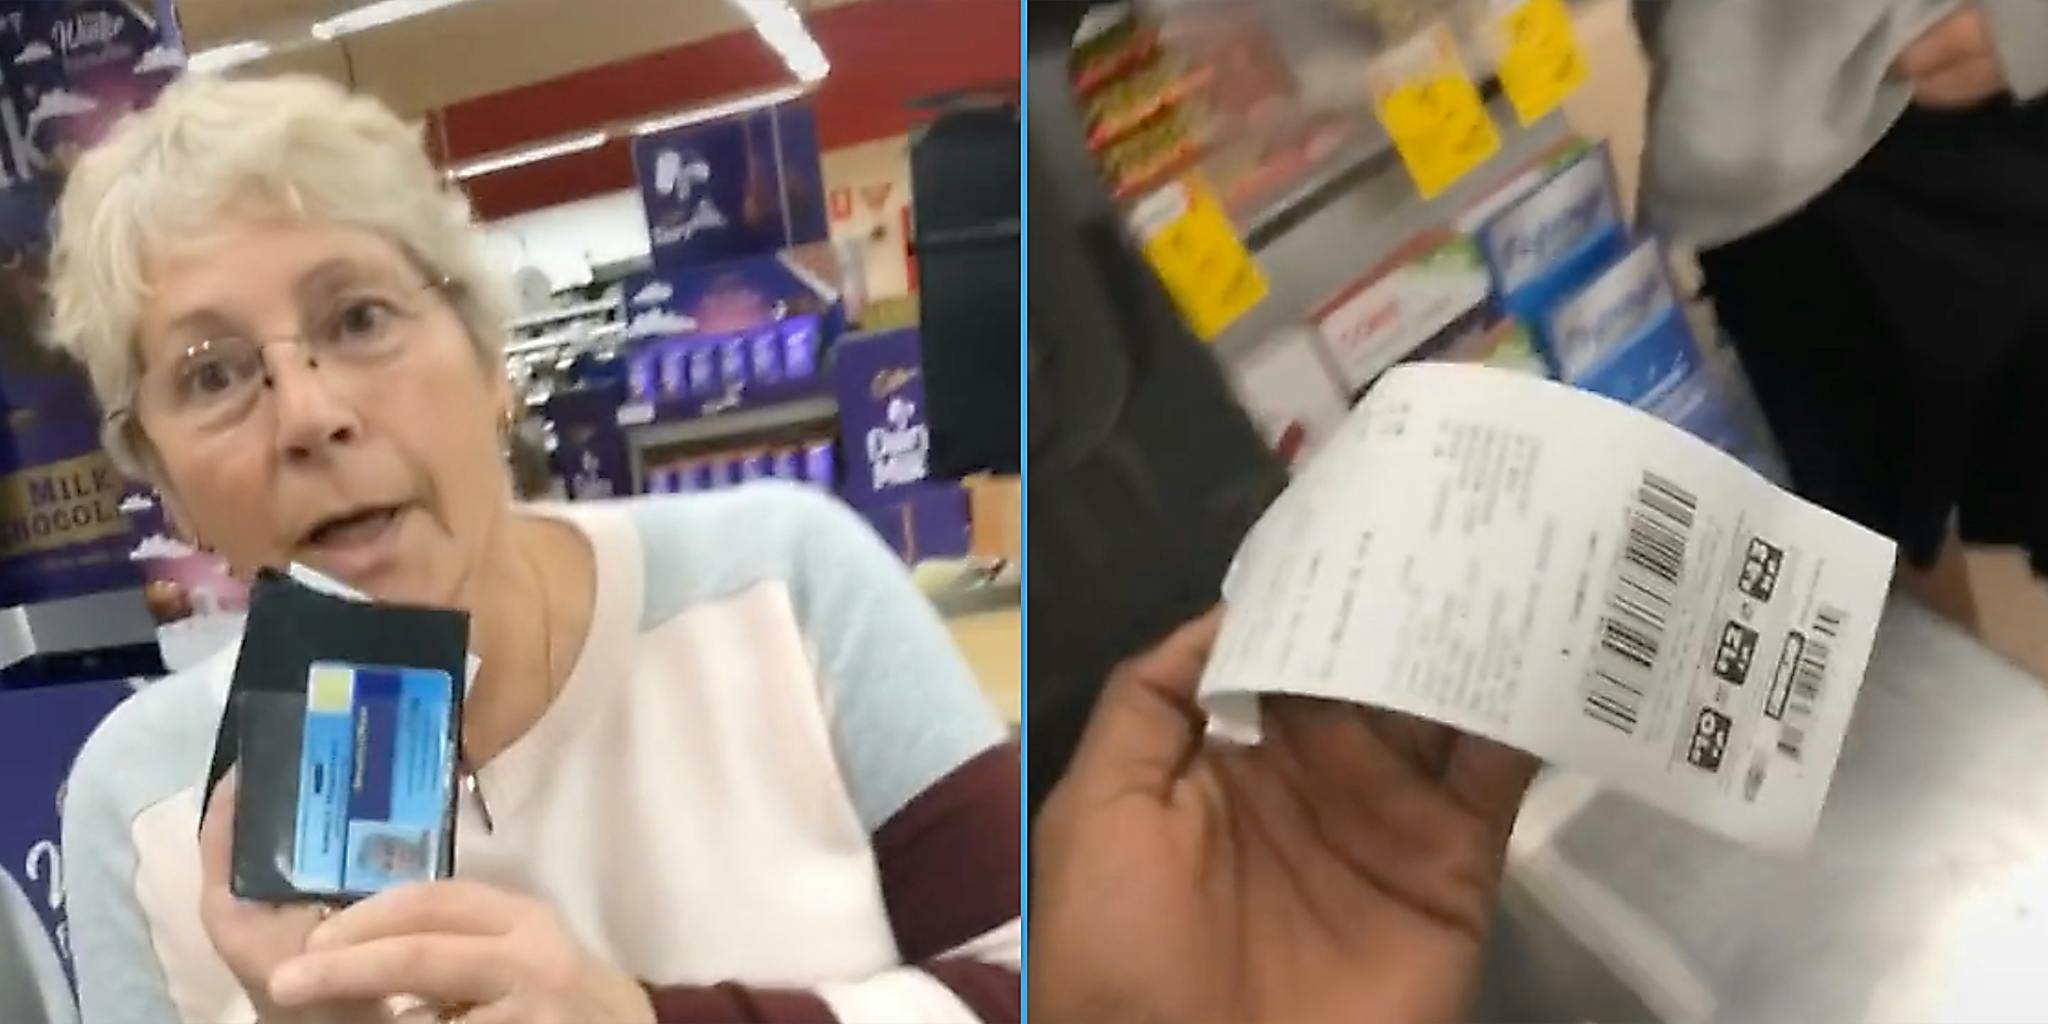 ‘Who made you security?’: Karen flashes random ID at Black man who ate gummy worms before paying for them